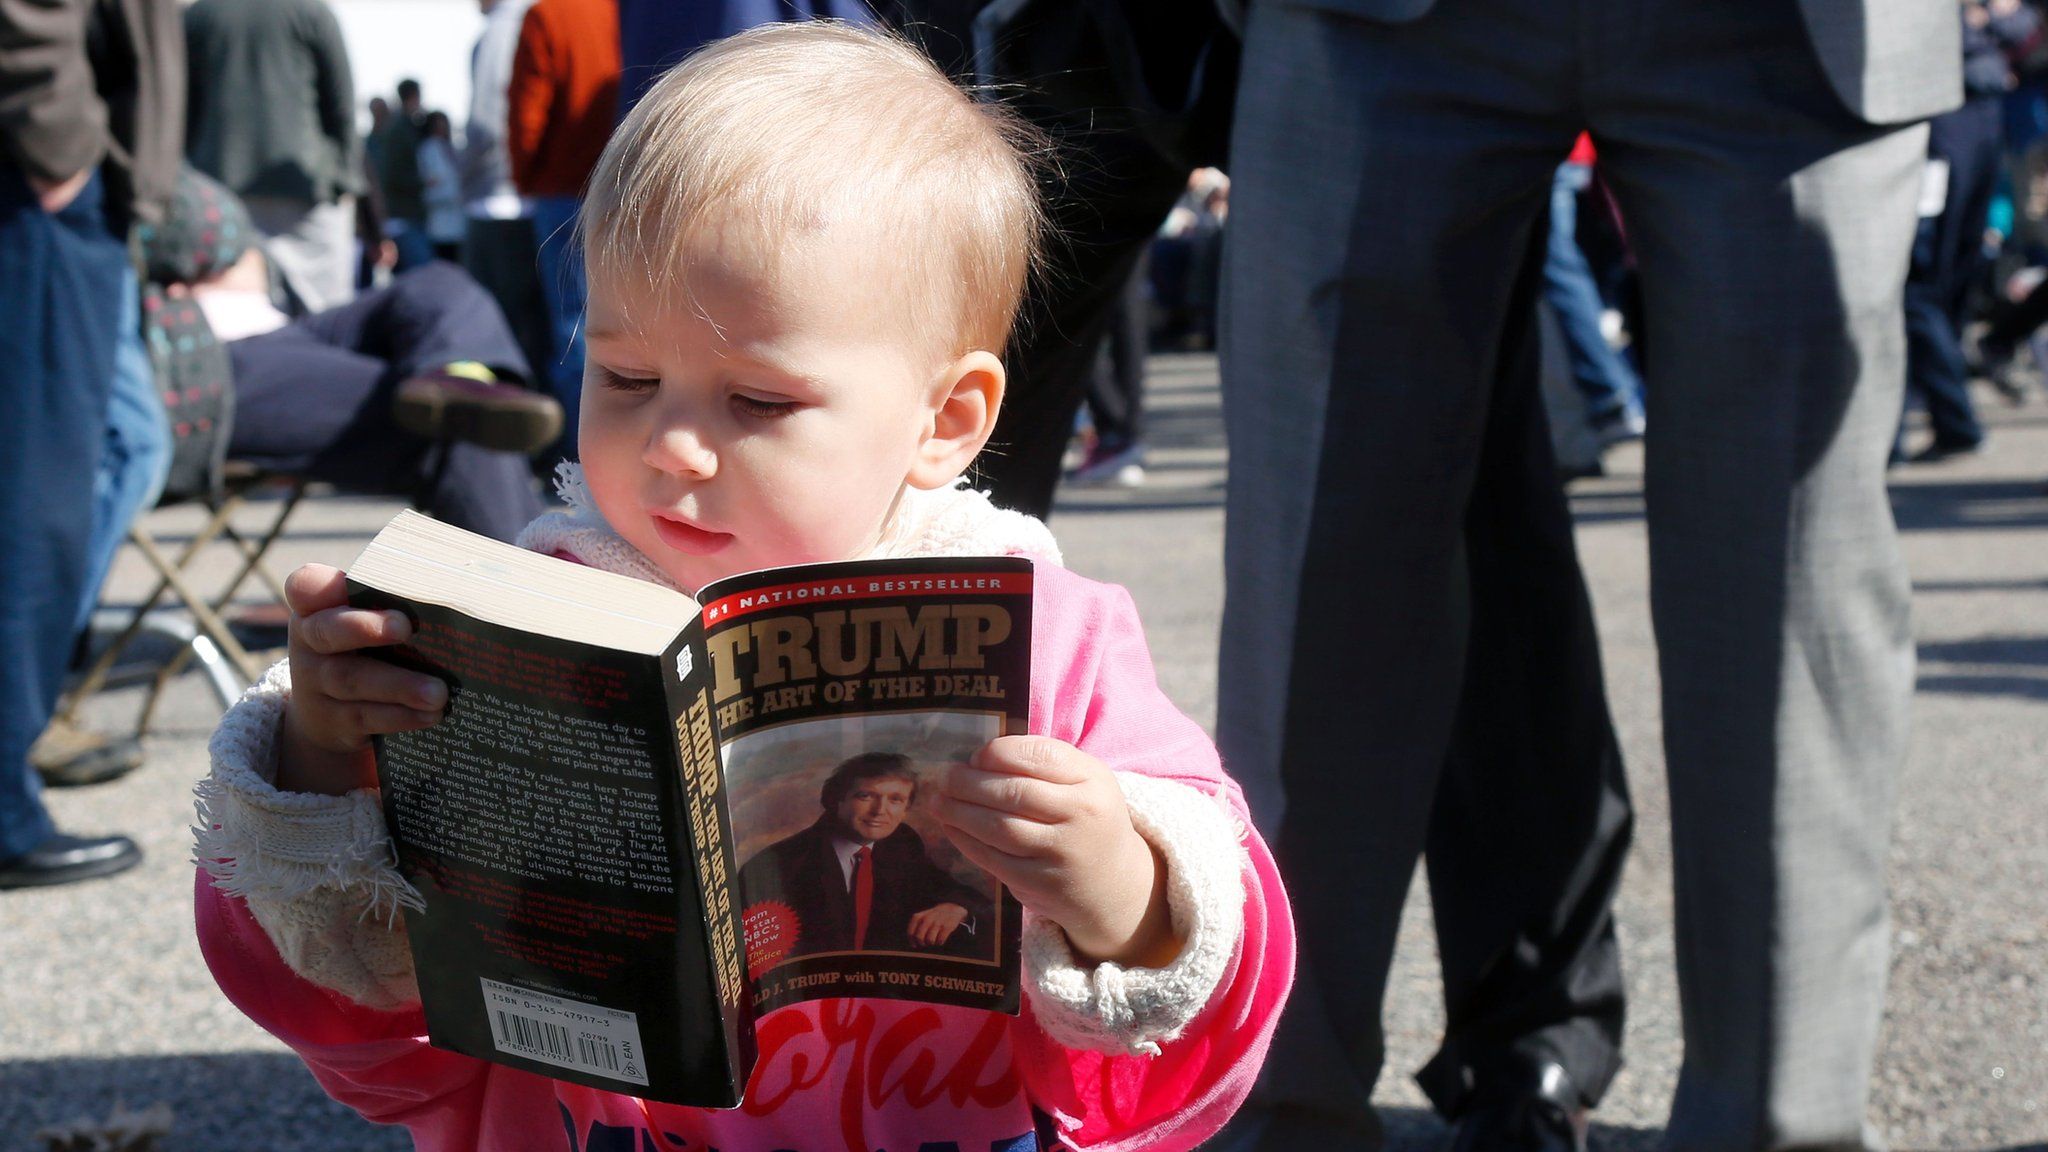 Grace Mahoney, 16 months, looks at a copy of 'The Art of the Deal' before the start of an event with Republican presidential candidate Donald Trump on October 15, 2016 in Portsmouth, New Hampshire.